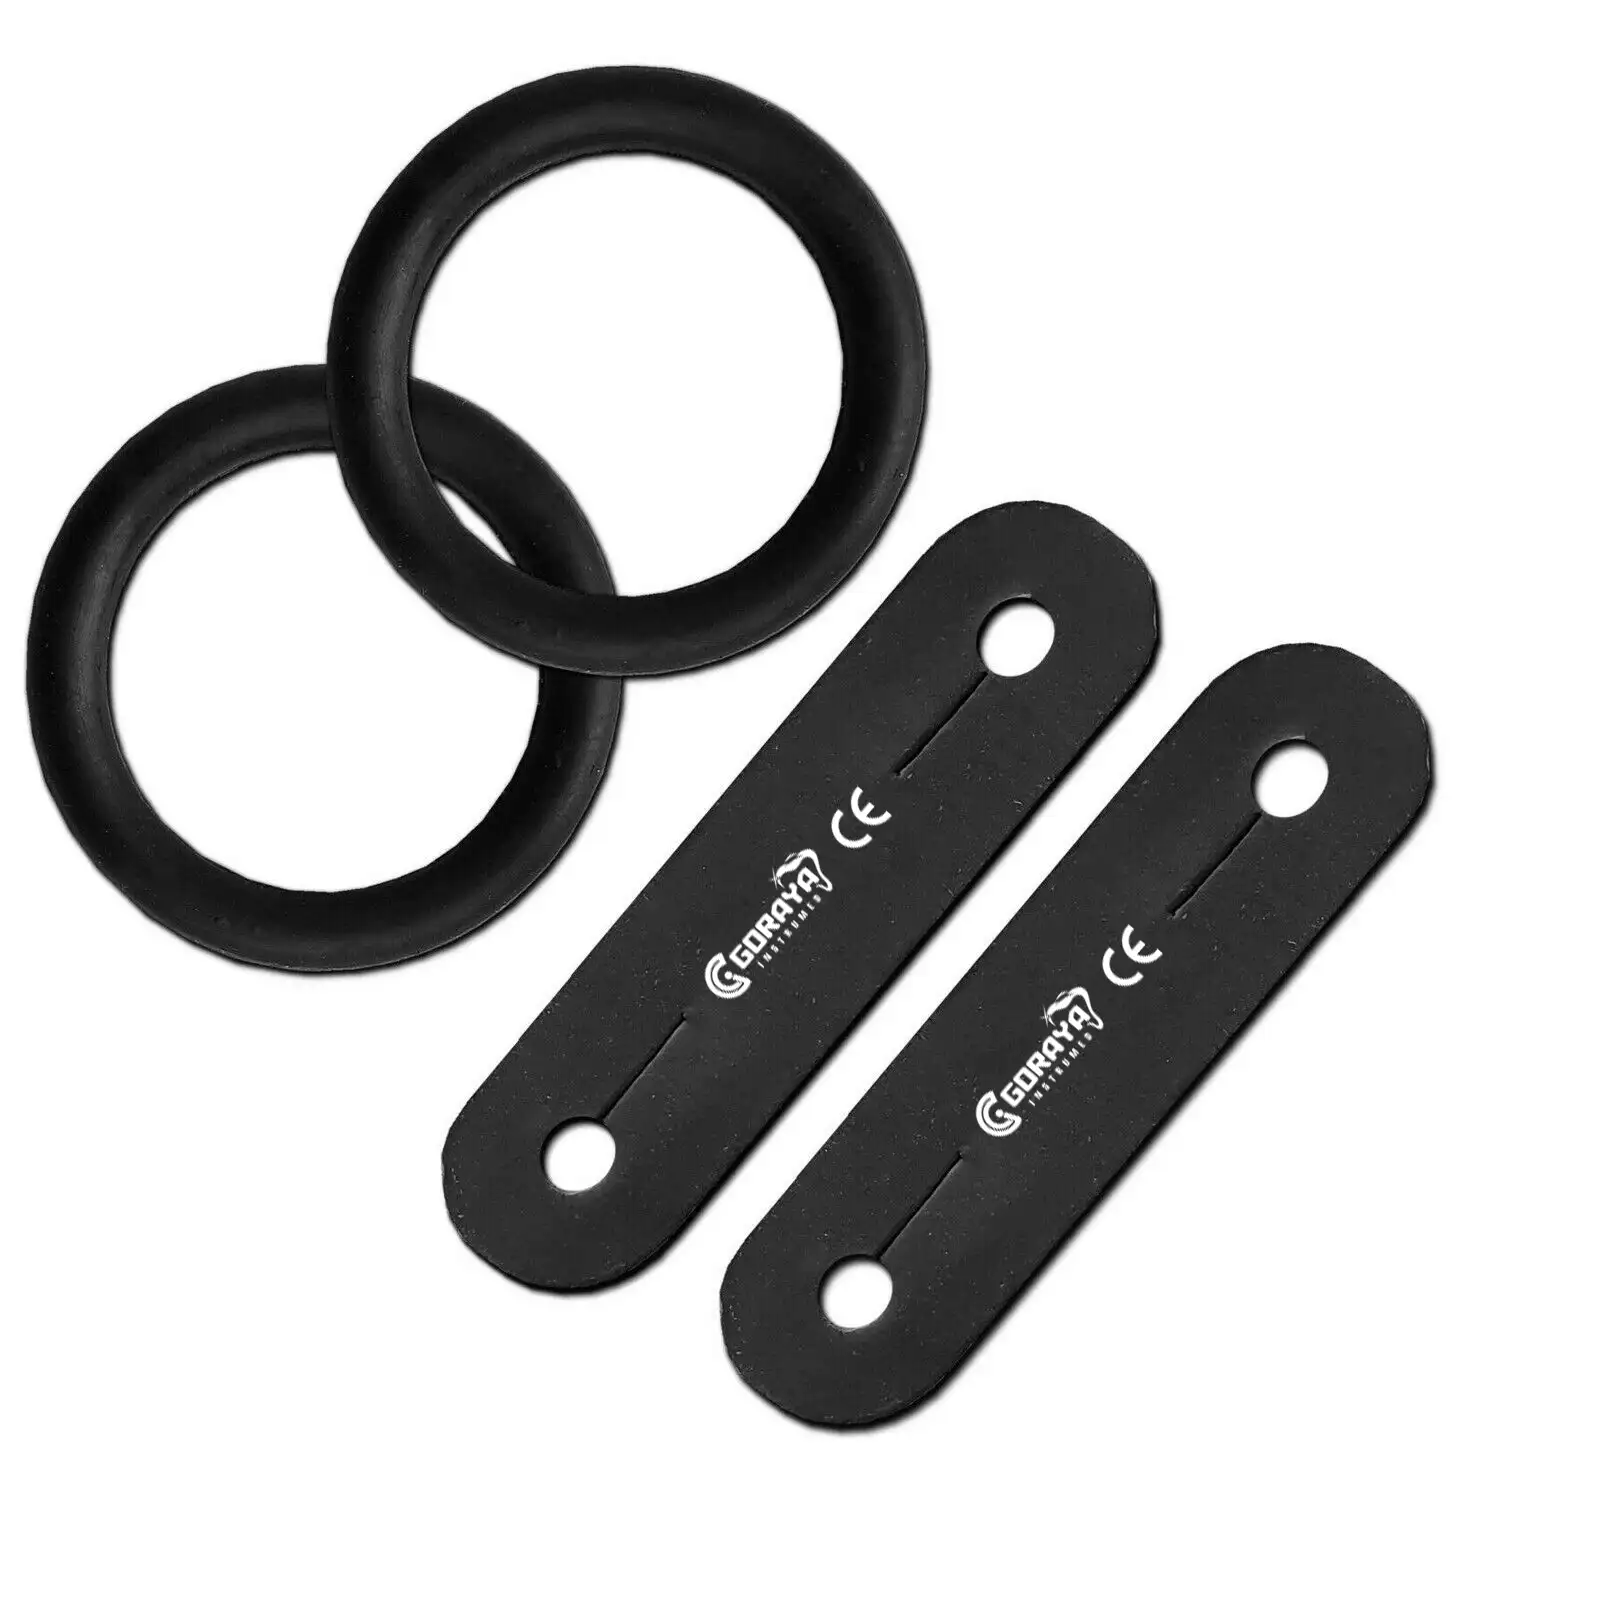 HOT SALE GORAYA GERMAN PEACOCK STIRRUPS RUBBER RINGS & LEATHER TABS FOR SAFETY STIRRUP IRONS ALL BLACK CE ISO APPROVED